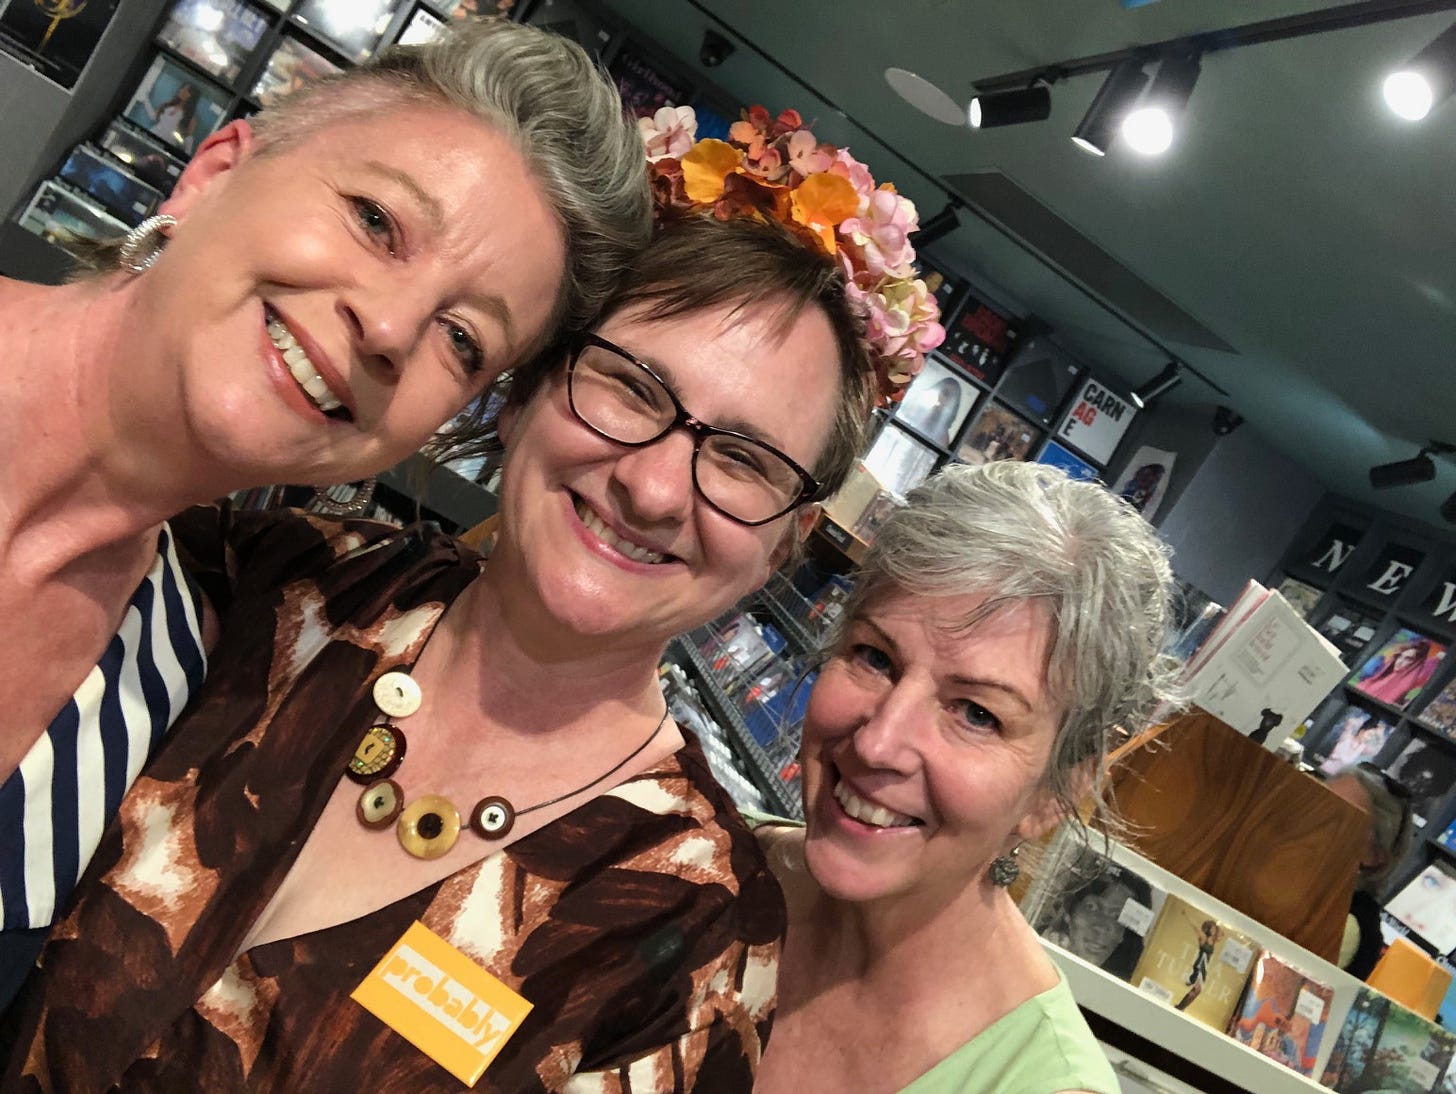 Three smiling women in a bookshop. One of the women is wearing a crown made of hydrangeas. I think she must be some kind of Queen or something. 